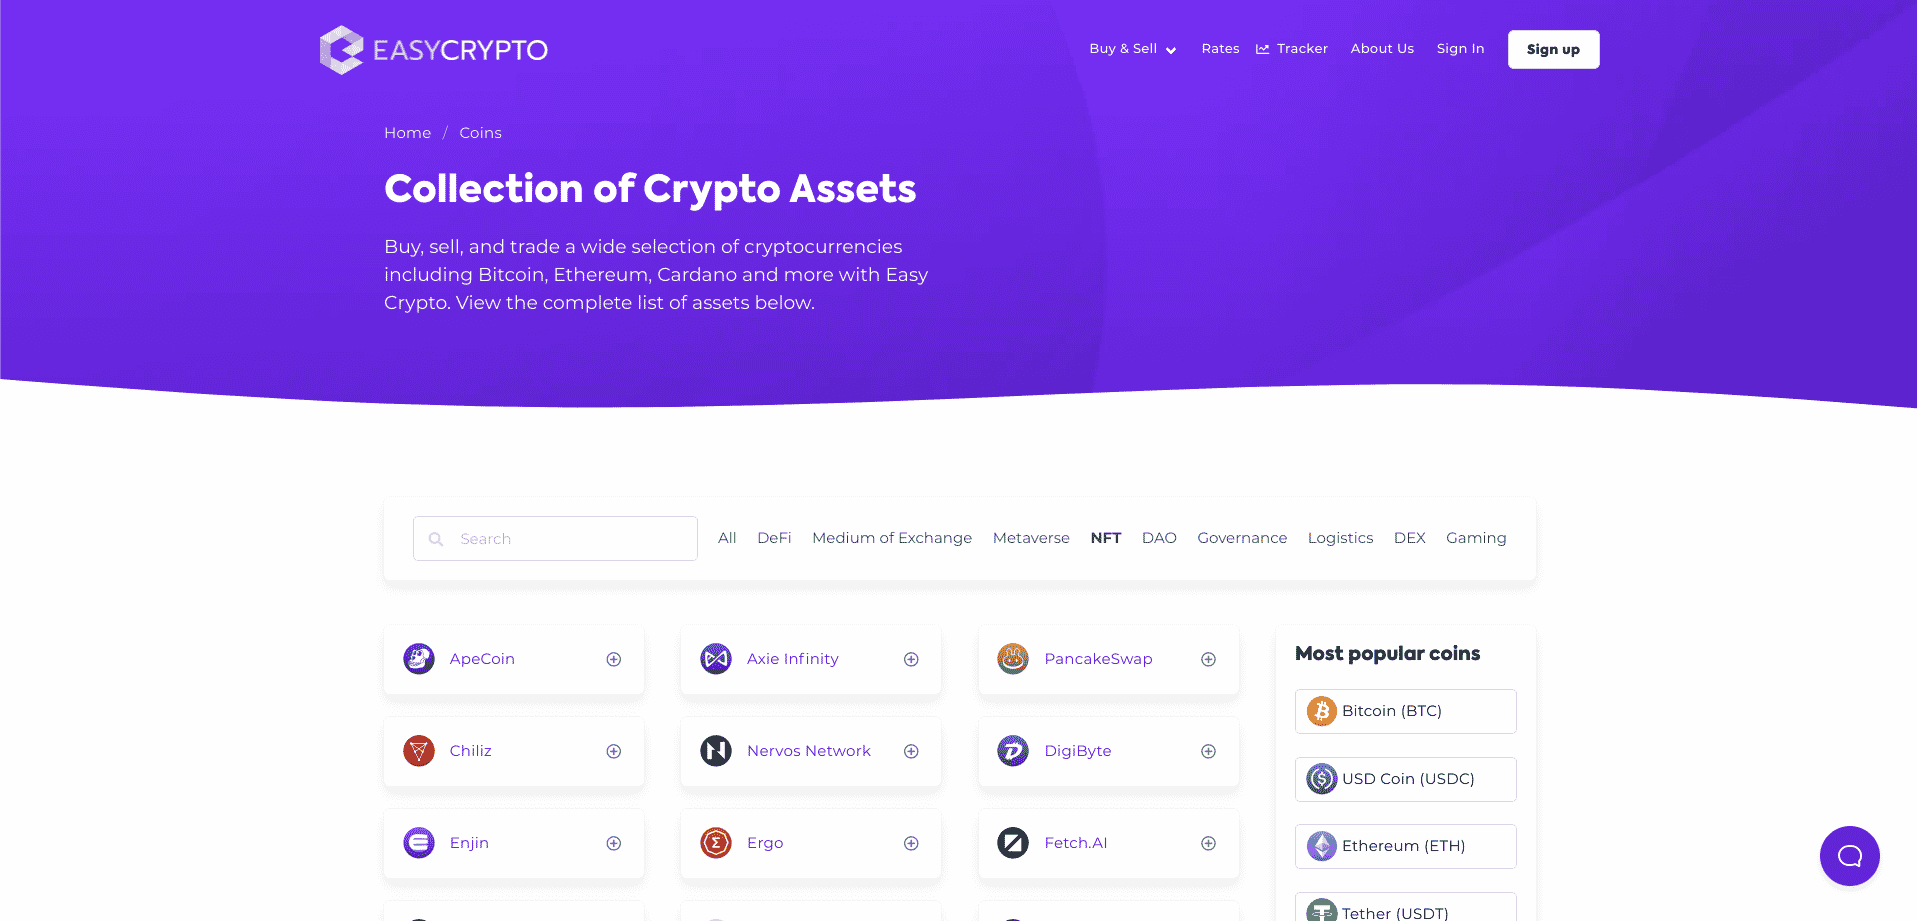 Buy and Sell cryptocurrencies with Easy Crypto